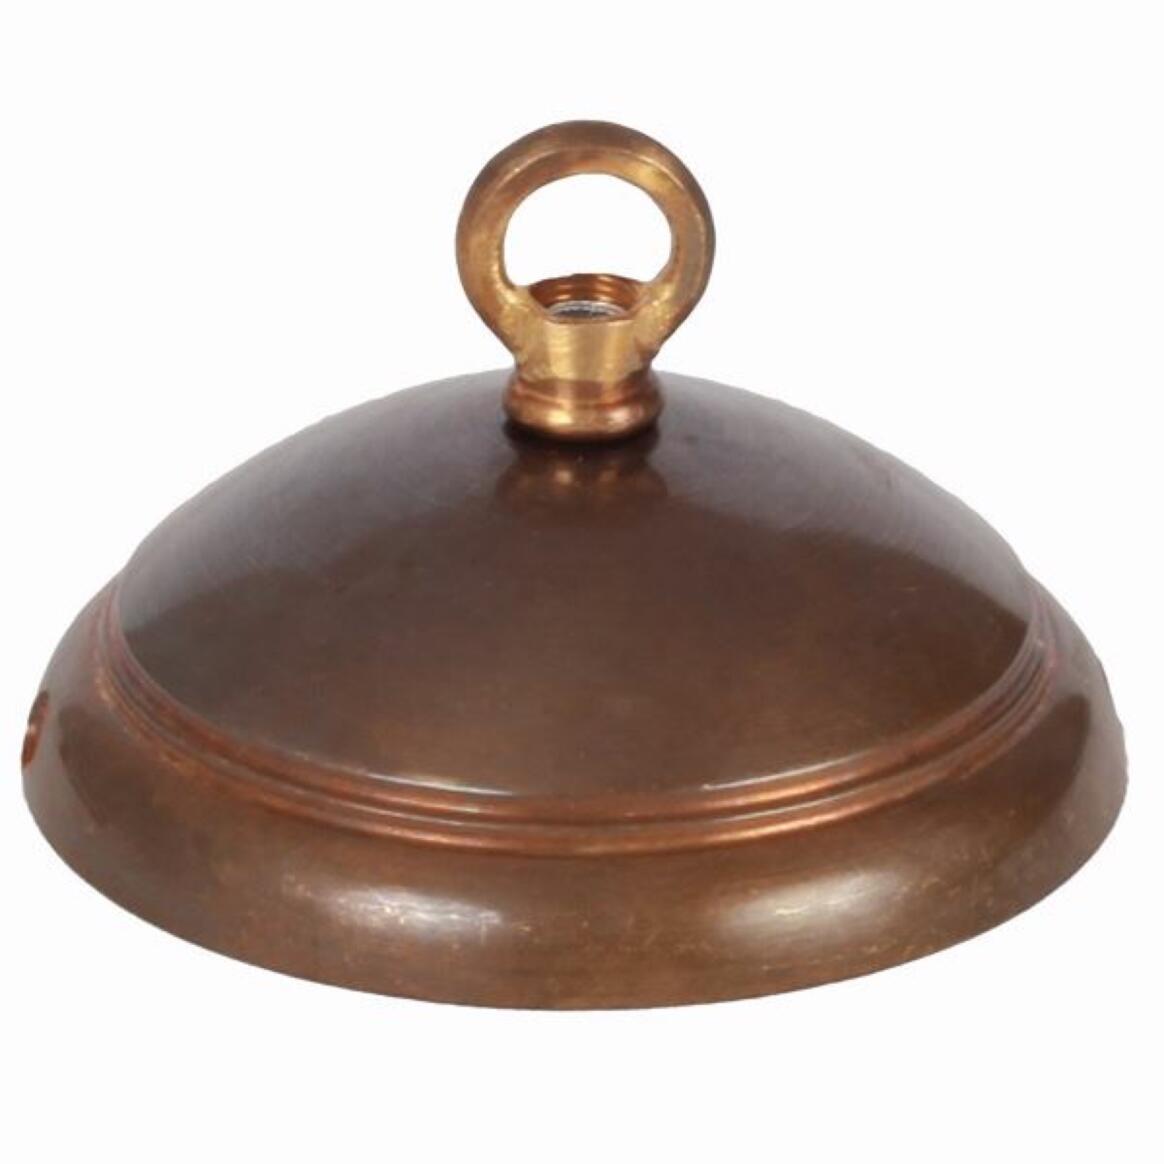 Brass ceiling rose light fitting, dome with closed hook main product image